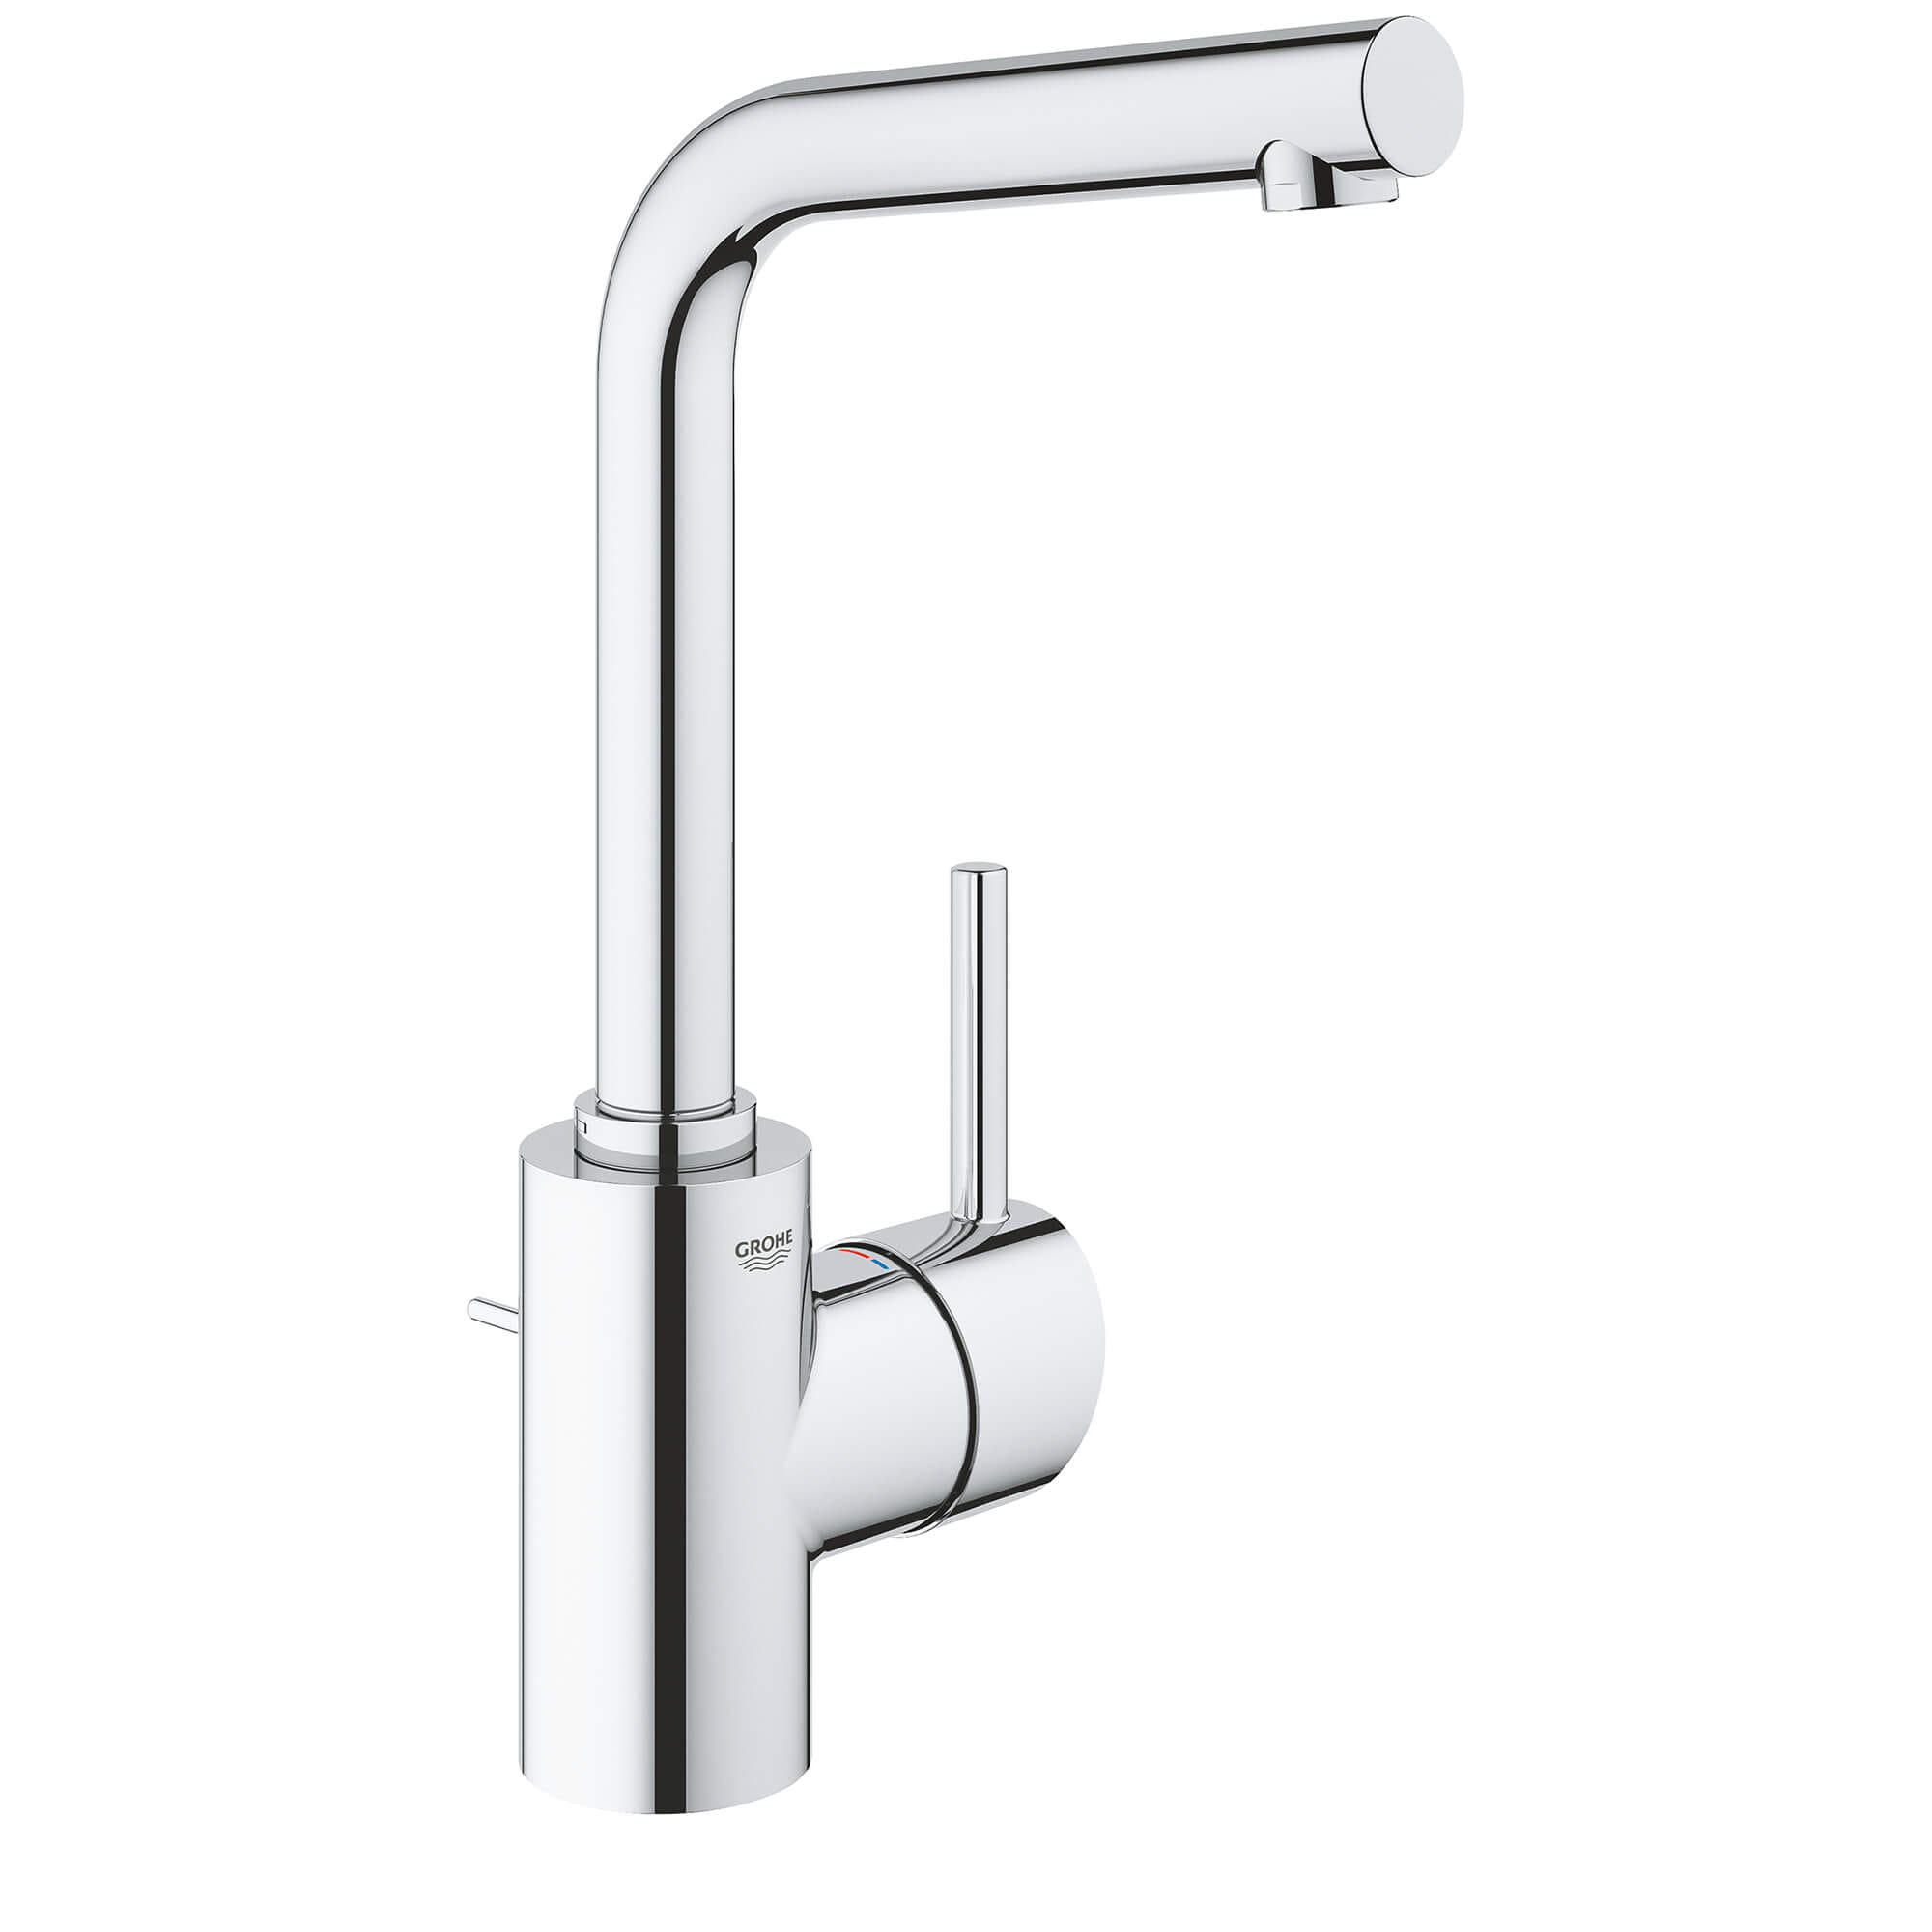 Robinet monotrou taille L GROHE CHROME